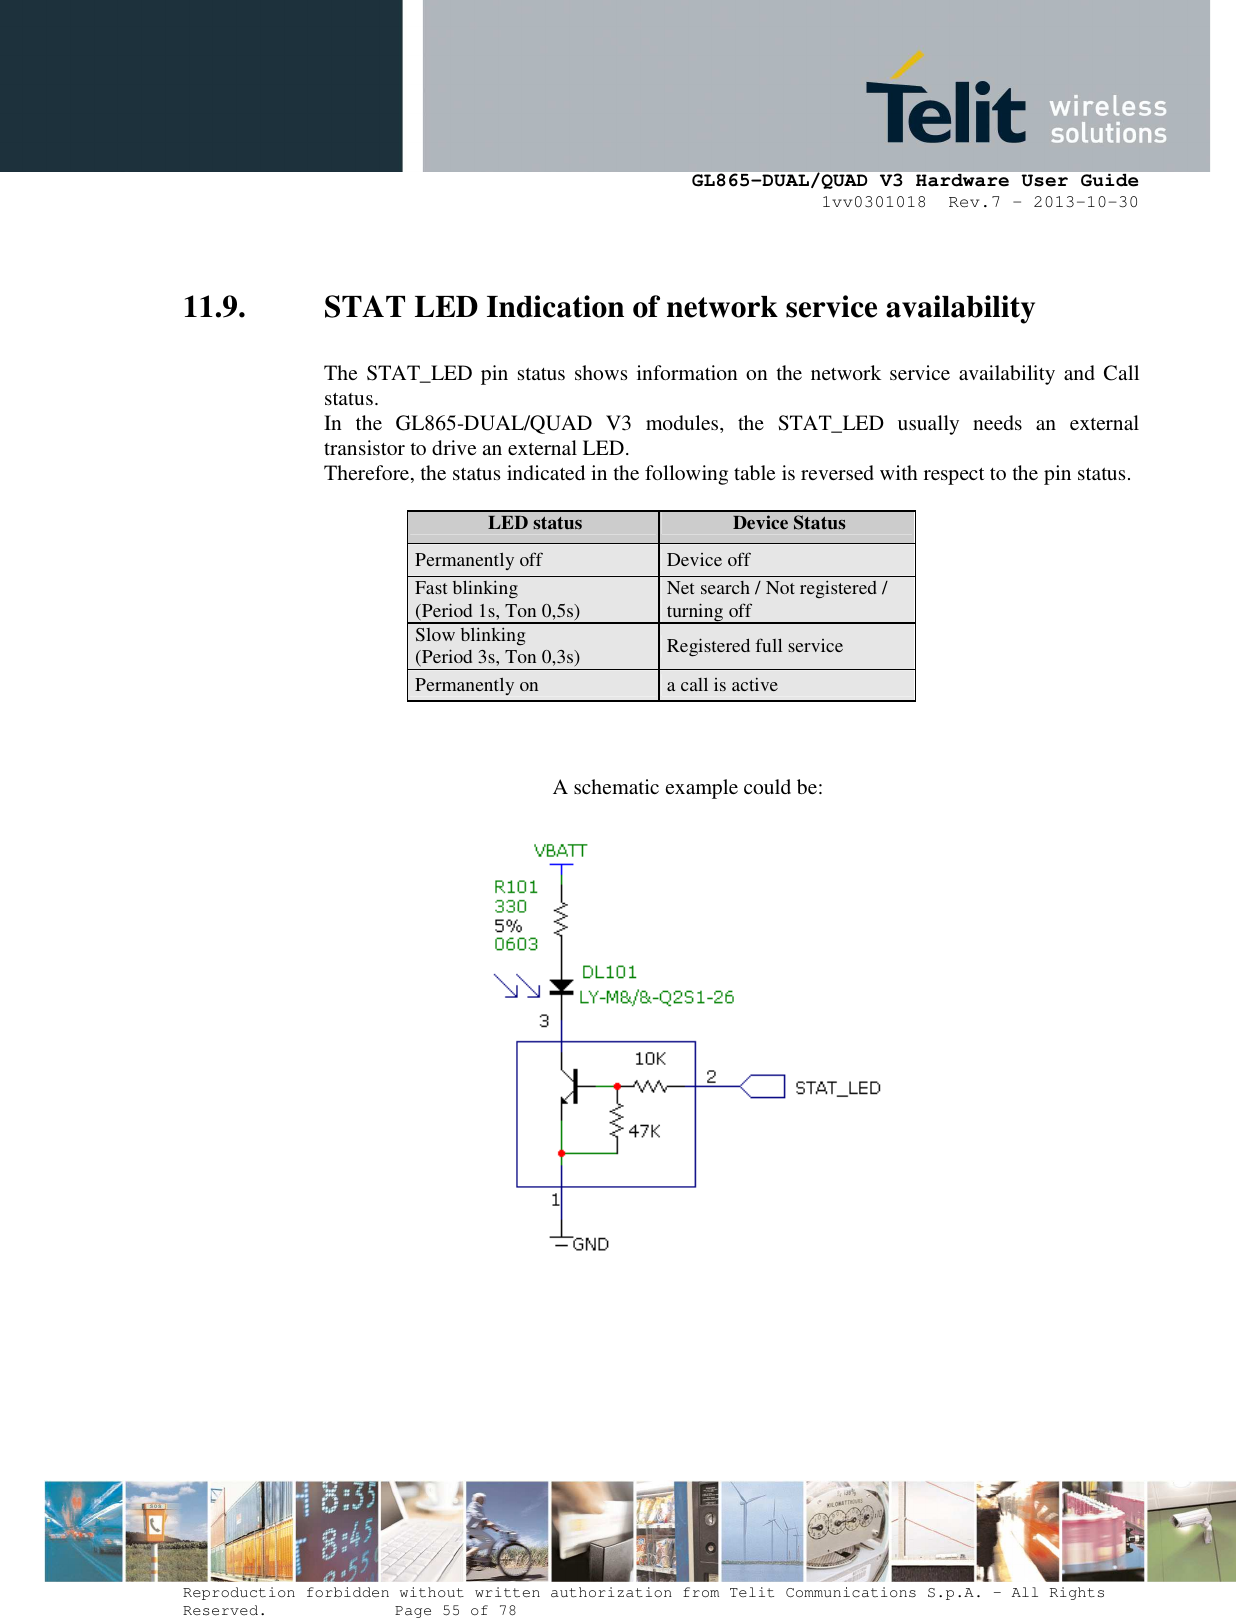      GL865-DUAL/QUAD V3 Hardware User Guide 1vv0301018  Rev.7 – 2013-10-30  Reproduction forbidden without written authorization from Telit Communications S.p.A. - All Rights Reserved.    Page 55 of 78 Mod. 0805 2011-07 Rev.2  11.9. STAT LED Indication of network service availability  The STAT_LED pin status shows information on  the network service availability and Call status.  In  the  GL865-DUAL/QUAD  V3  modules,  the  STAT_LED  usually  needs  an  external transistor to drive an external LED. Therefore, the status indicated in the following table is reversed with respect to the pin status.             LED status  Device Status Permanently off  Device off Fast blinking (Period 1s, Ton 0,5s)  Net search / Not registered / turning off Slow blinking (Period 3s, Ton 0,3s)  Registered full service Permanently on  a call is active                    A schematic example could be:                         